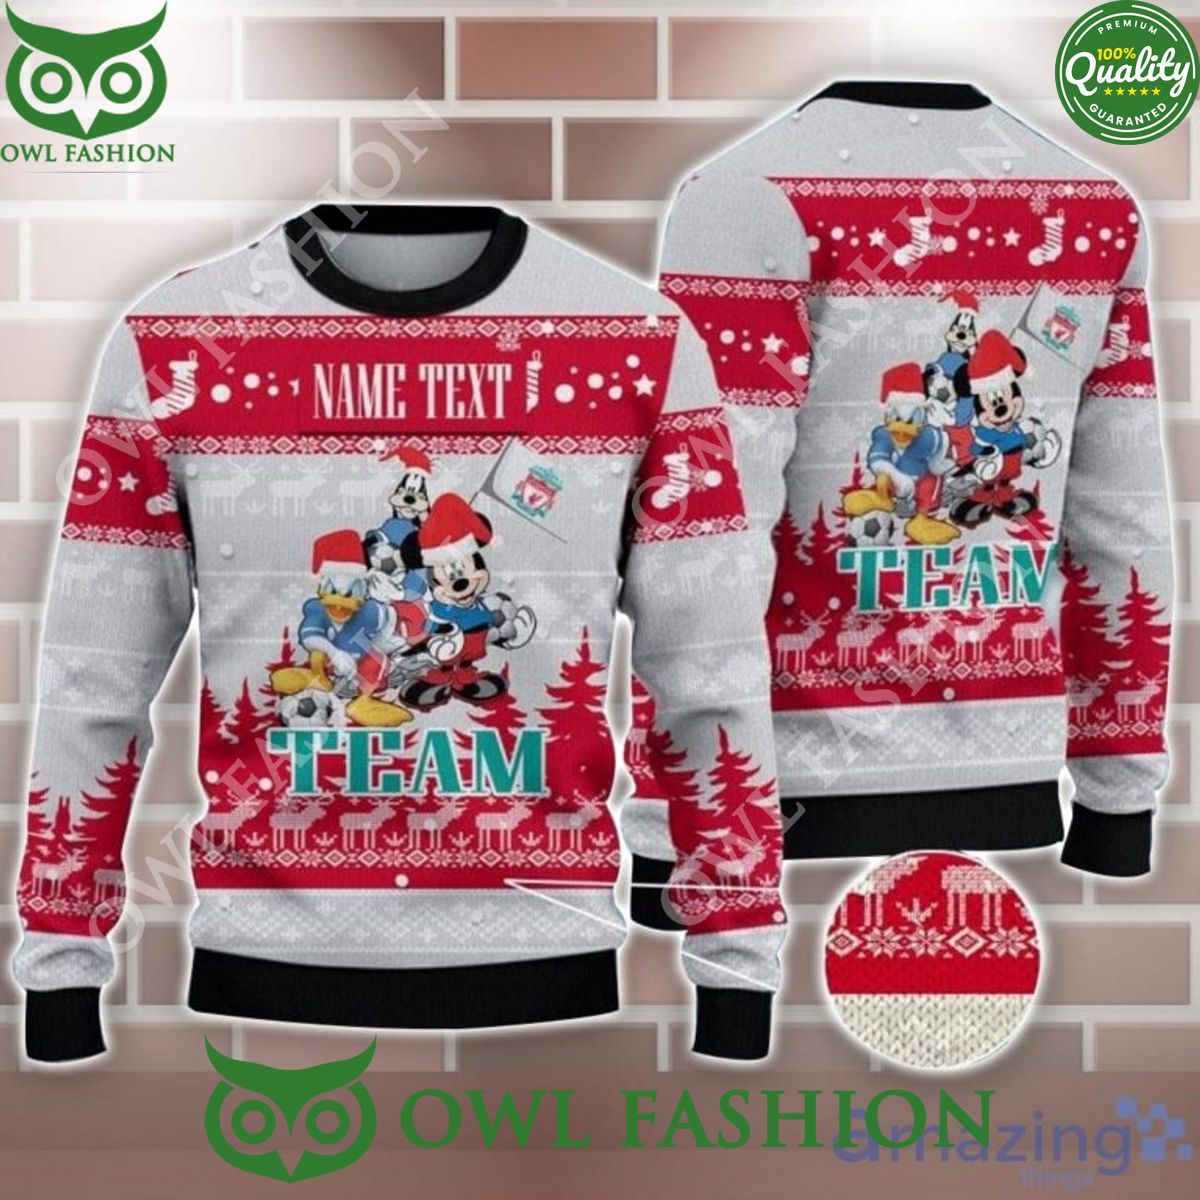 Disney Team Liverpool FC Customized Ugly Christmas Sweater Jumper Nice Pic